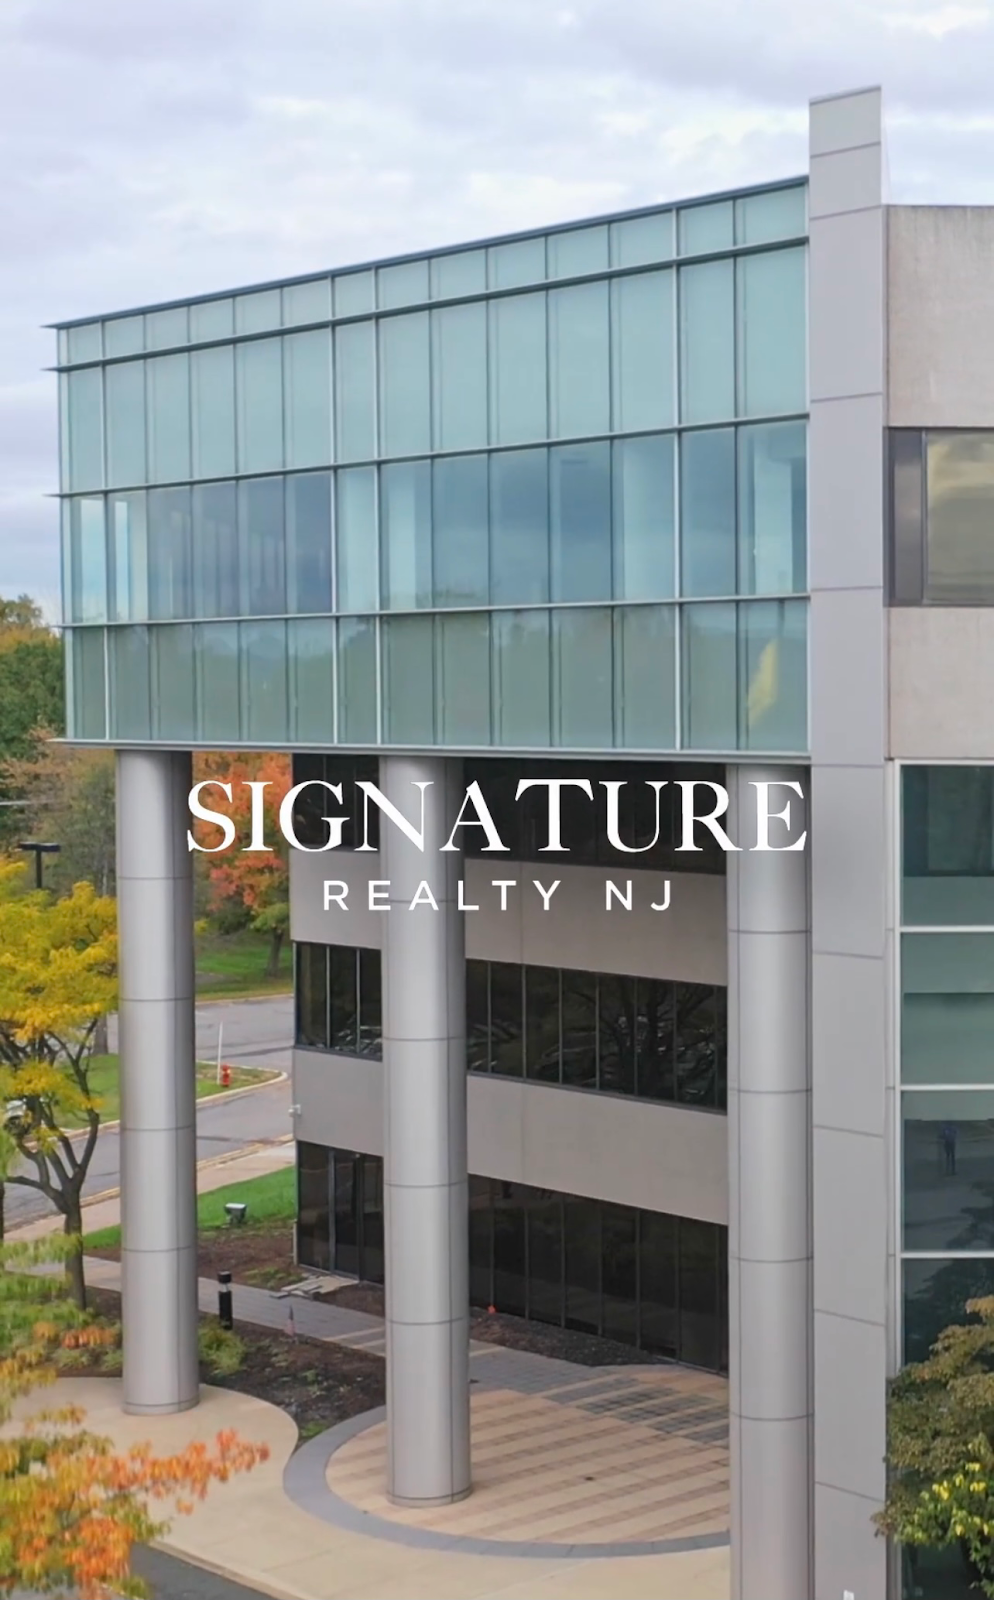 Signature Realty NJ | Top Real Estate Company | Somerset County | 399 Campus Dr Suite 200, Somerset, NJ 08873 | Phone: (973) 921-1111